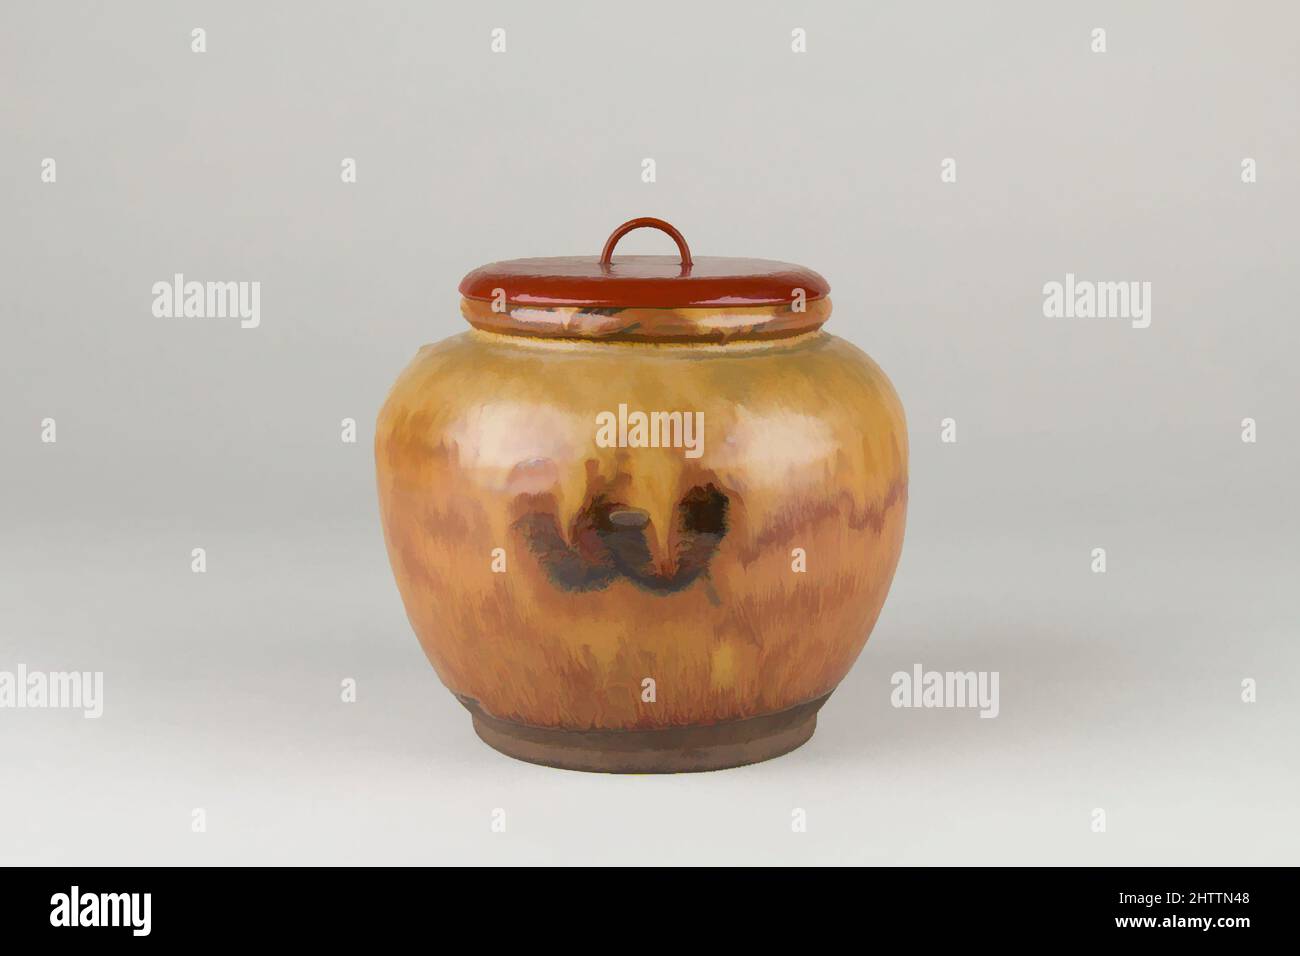 Art inspired by Jar with Cover, Song dynasty (960–1279), China, Pottery (Temmoku glaze), H. 5 in. (12.7 cm); Diam. 5 1/4 in. (13.3 cm), Ceramics, Cover made by Ikkan, Classic works modernized by Artotop with a splash of modernity. Shapes, color and value, eye-catching visual impact on art. Emotions through freedom of artworks in a contemporary way. A timeless message pursuing a wildly creative new direction. Artists turning to the digital medium and creating the Artotop NFT Stock Photo